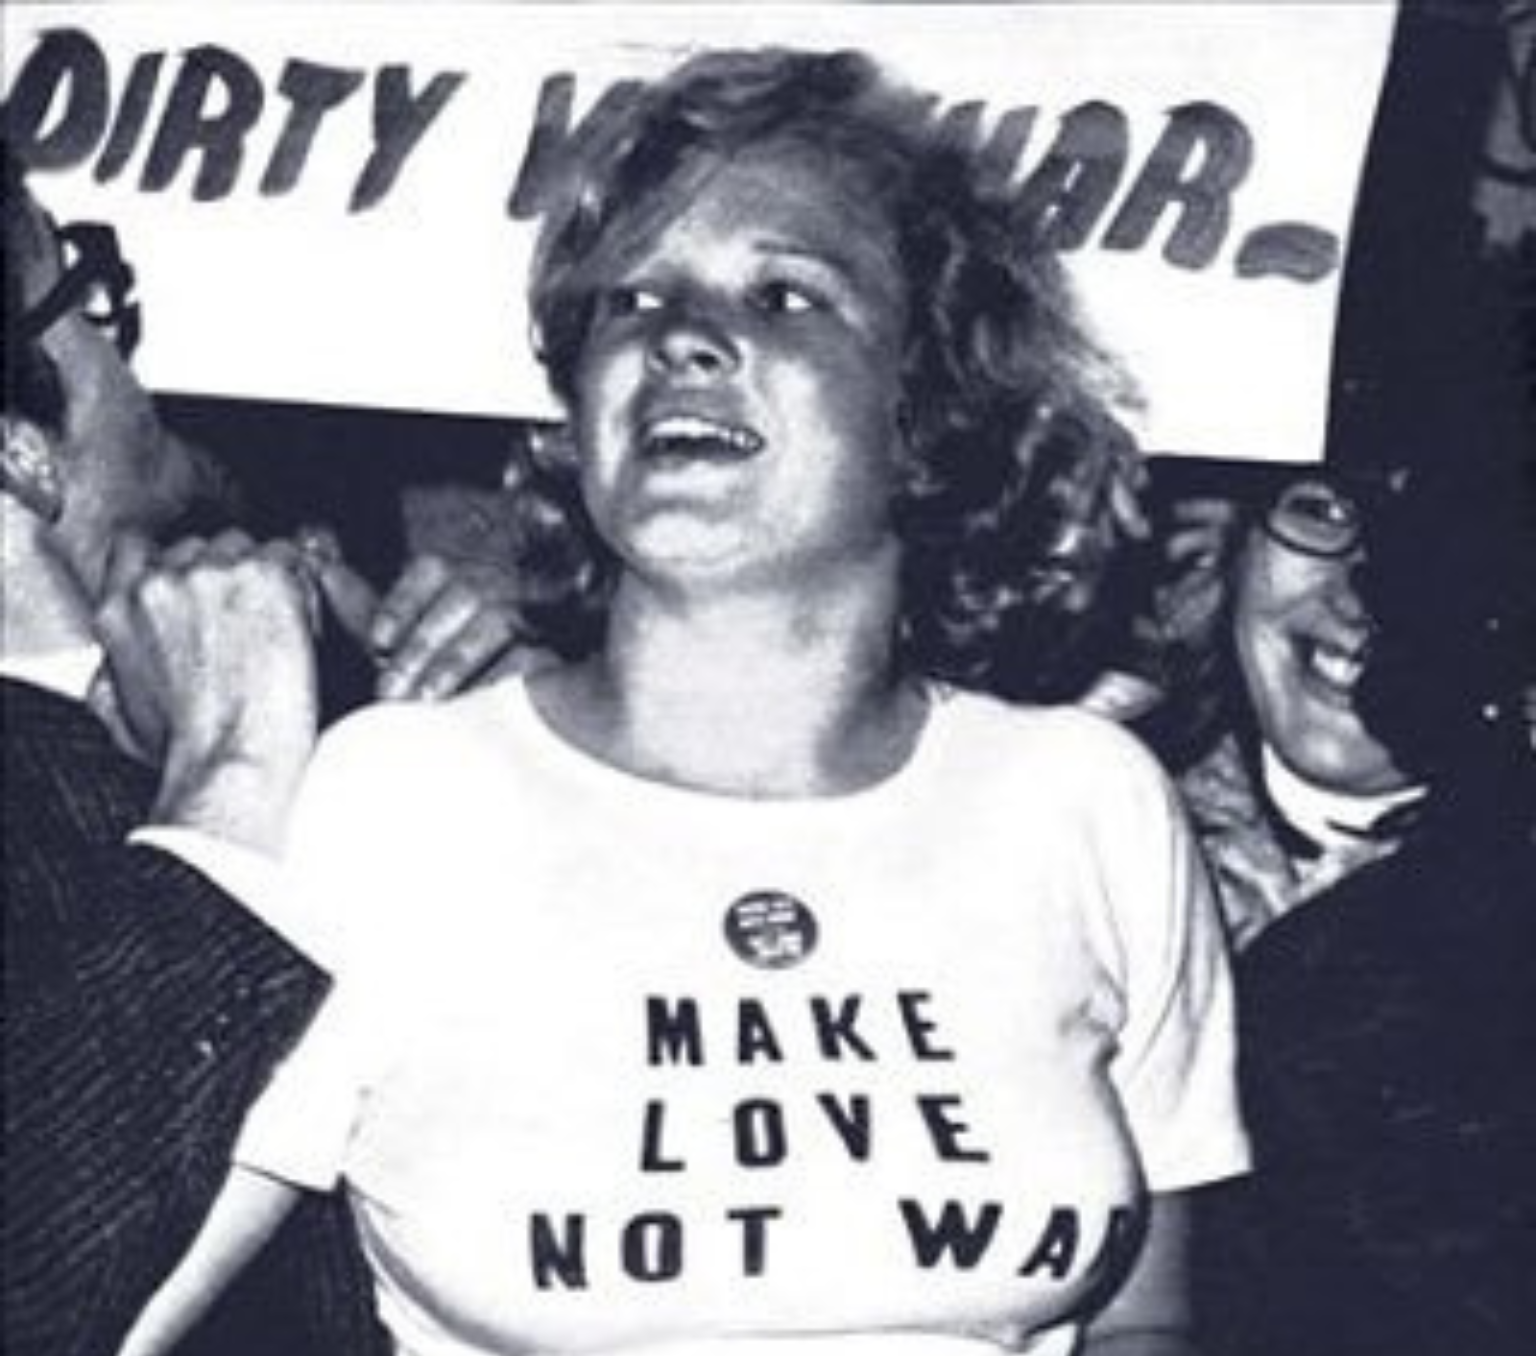 Megan Stoyles pictured in 1966 at a protest wearing a T-shirt that says 'Make Love Not War'.